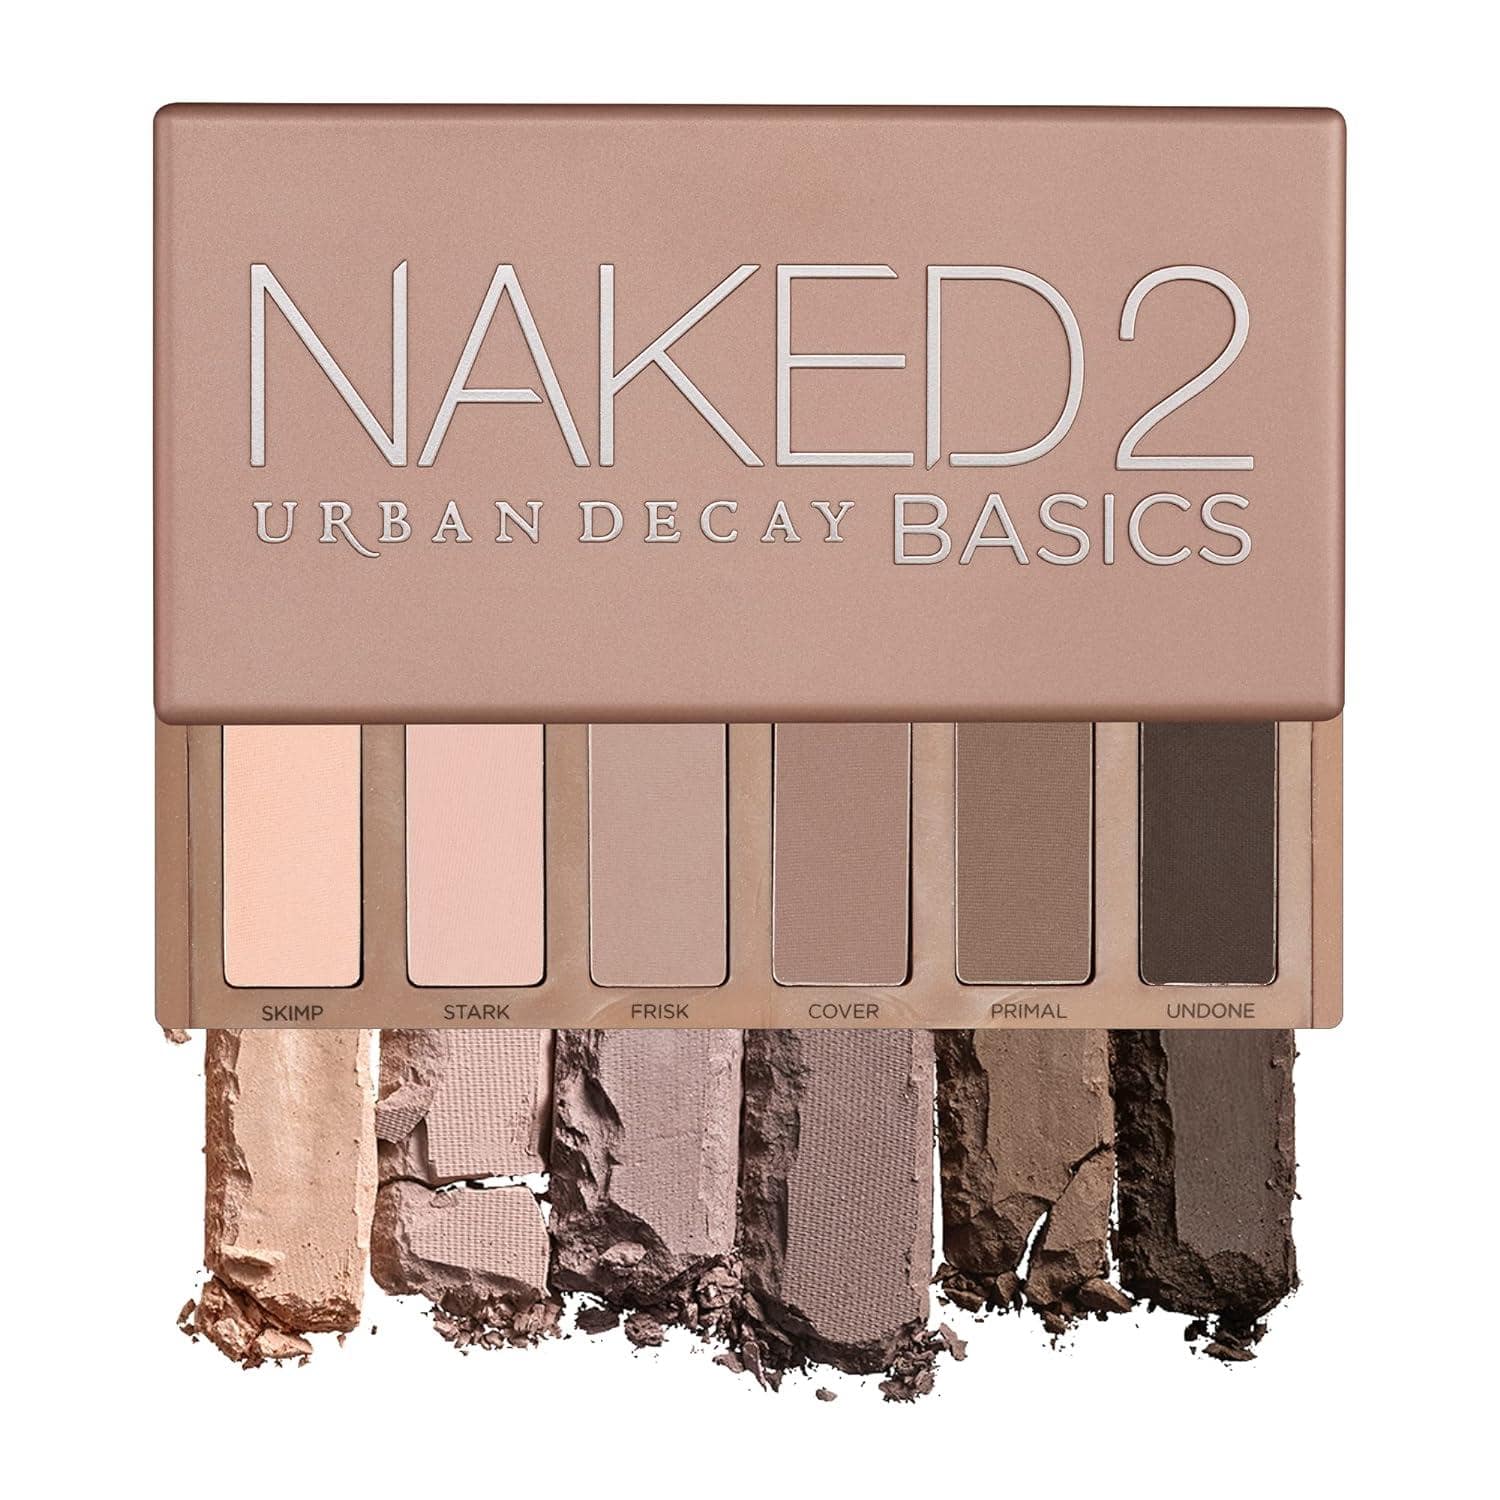 the Urban Decay Naked2 Basics Palette, a trendsetting wonder! At $33, this mini gem boasts six universally flattering matte shades, offering affordability without compromising quality. Essential in any makeup collection!